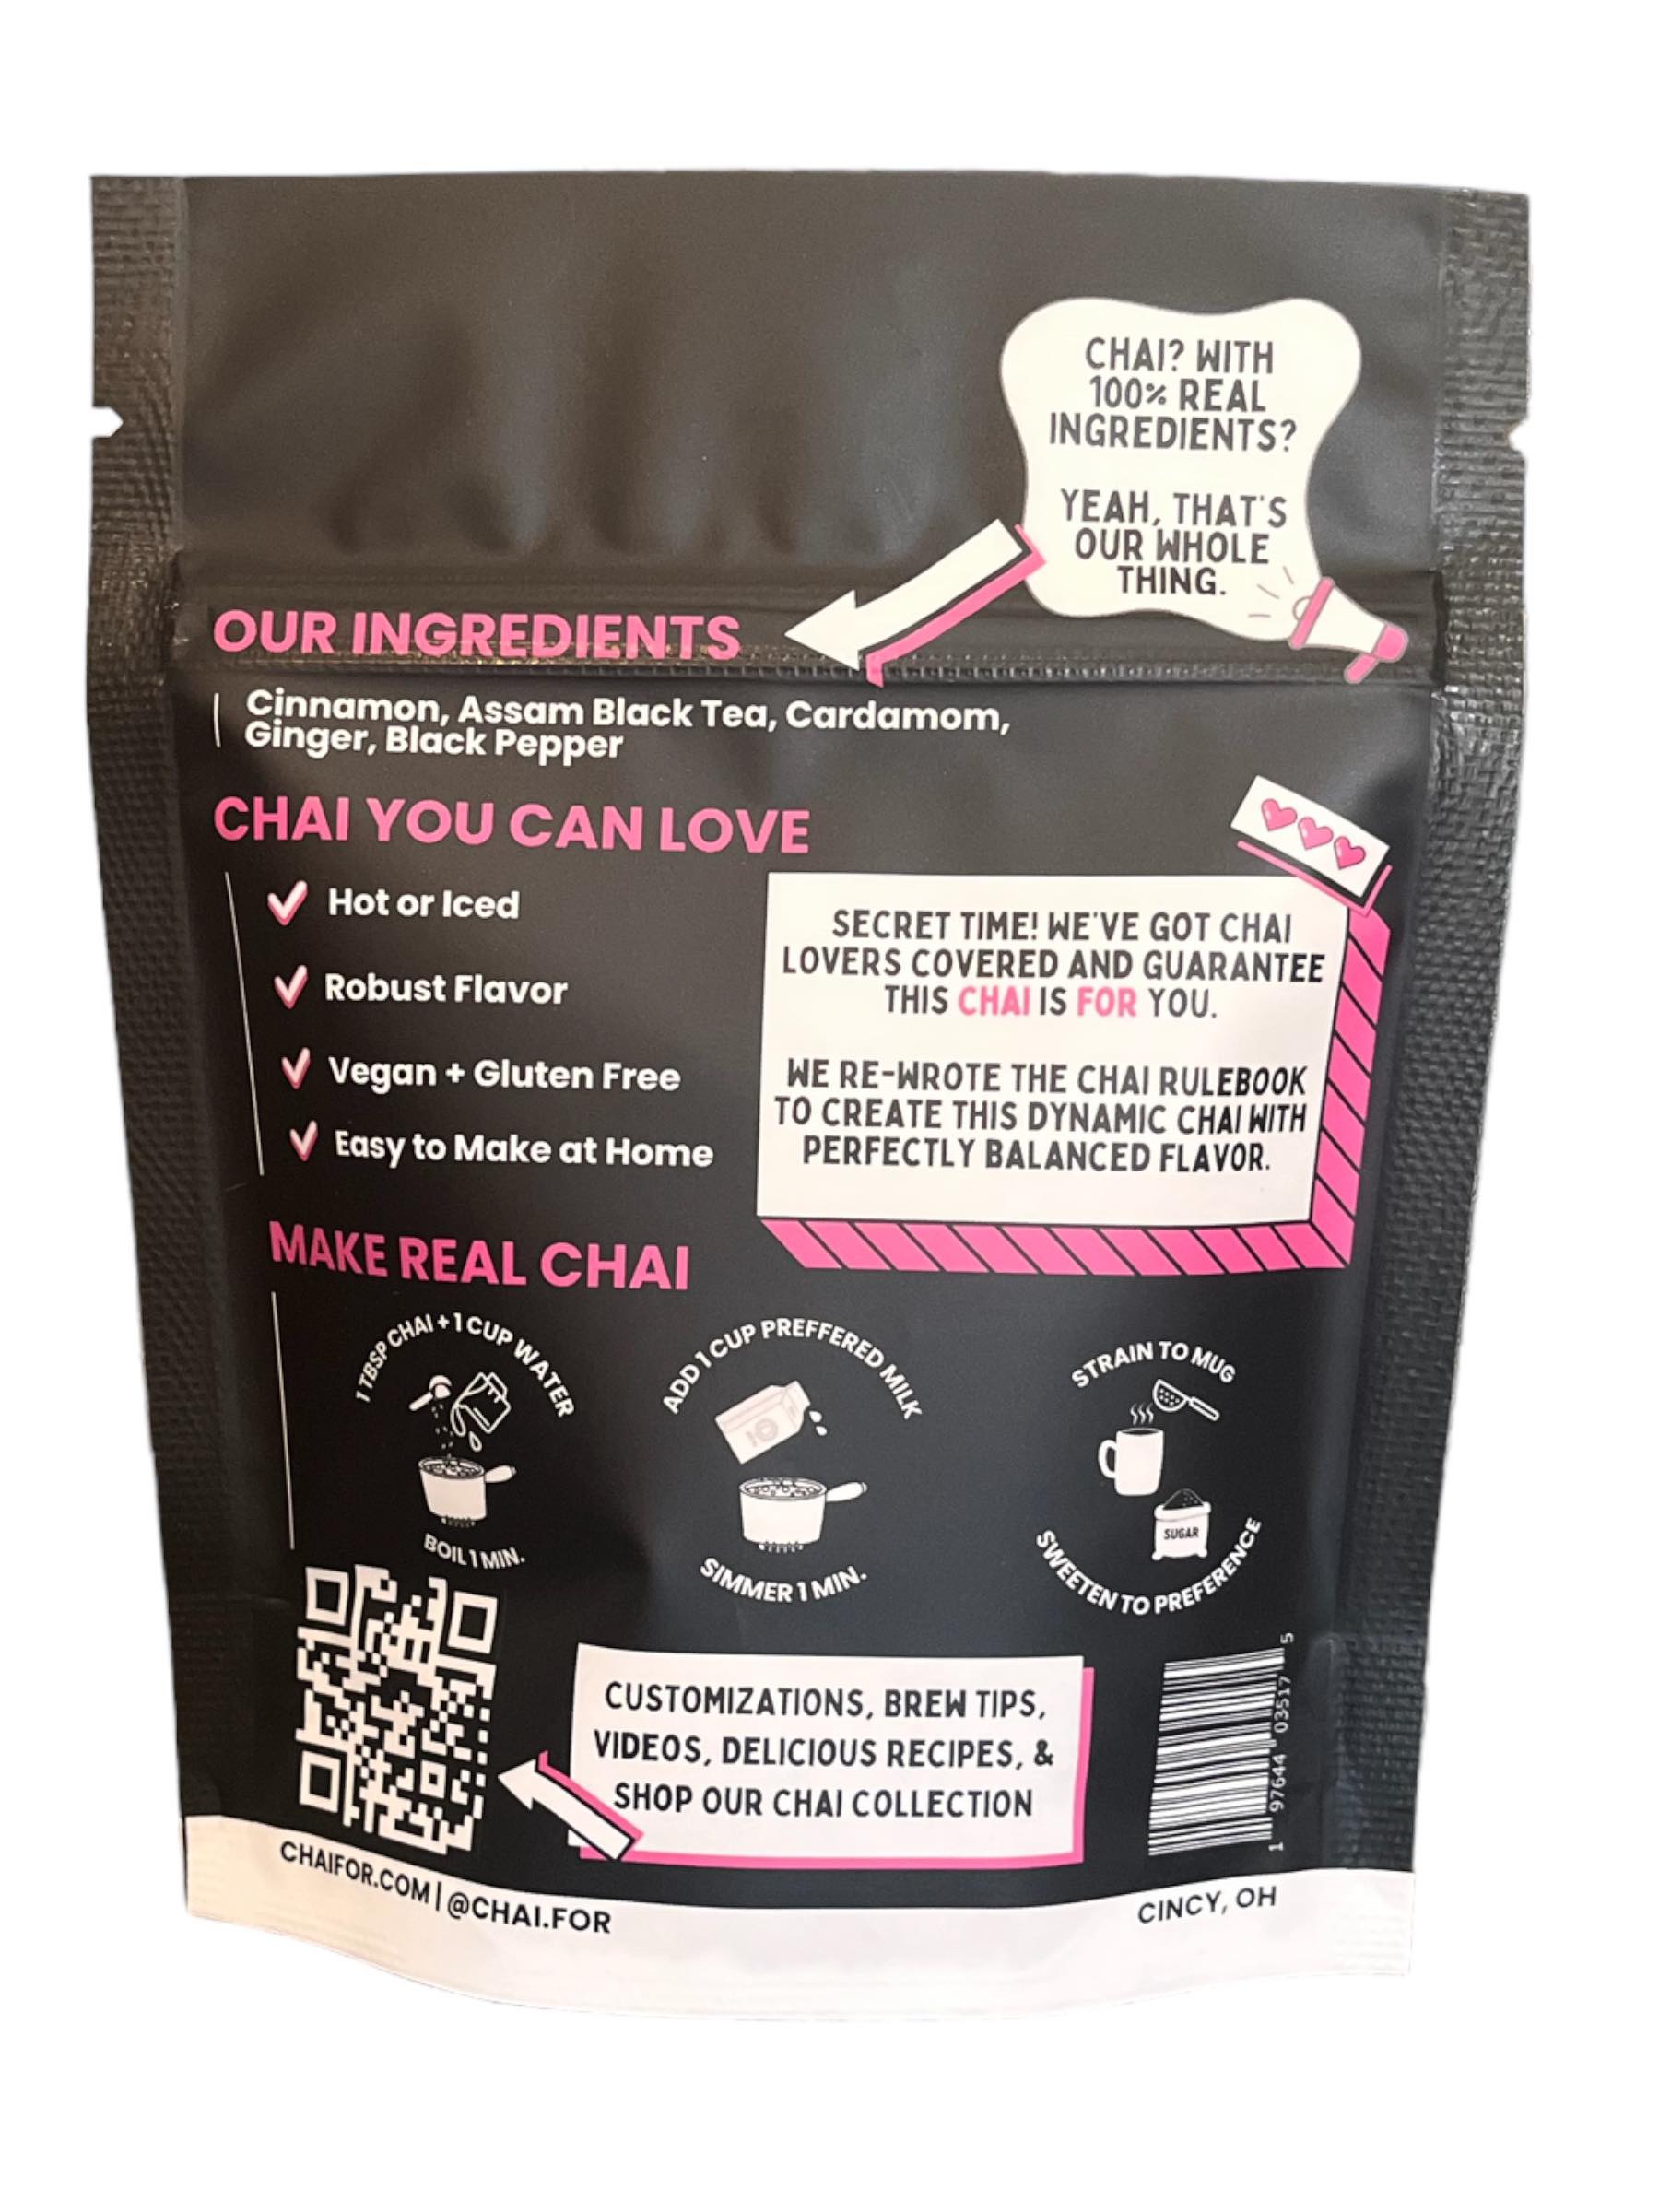 Traditional Chai Packaging showing our ingredients, how to make the chai, and with links to our chai making webpage.